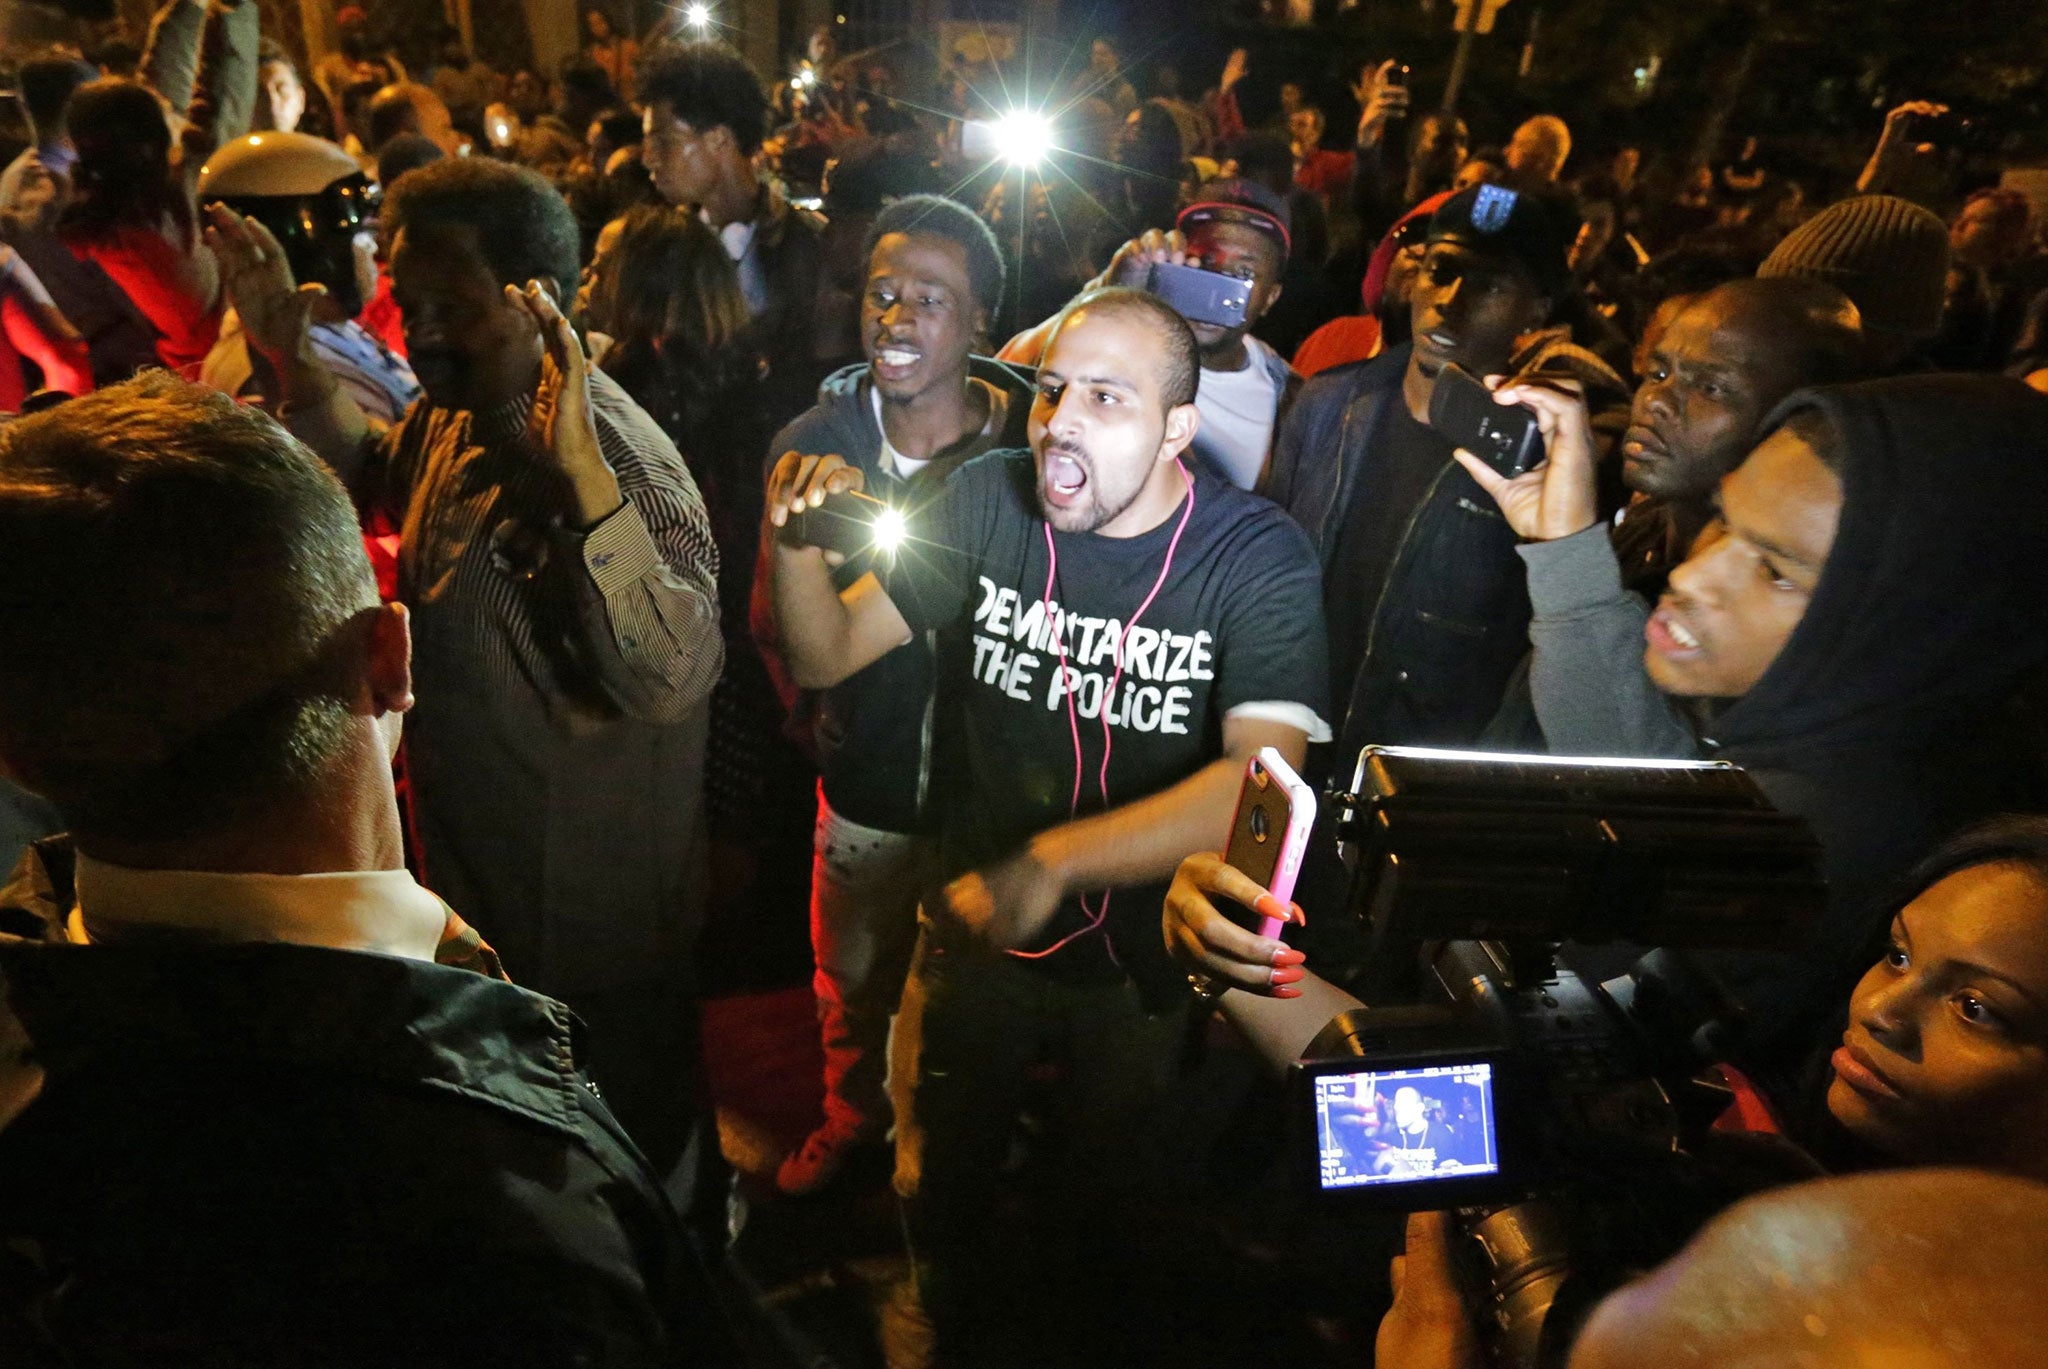 Crowds confront police near the scene in in south St. Louis where a man was fatally shot by an off-duty St. Louis police officer on Wednesday, Oct. 8, 2014